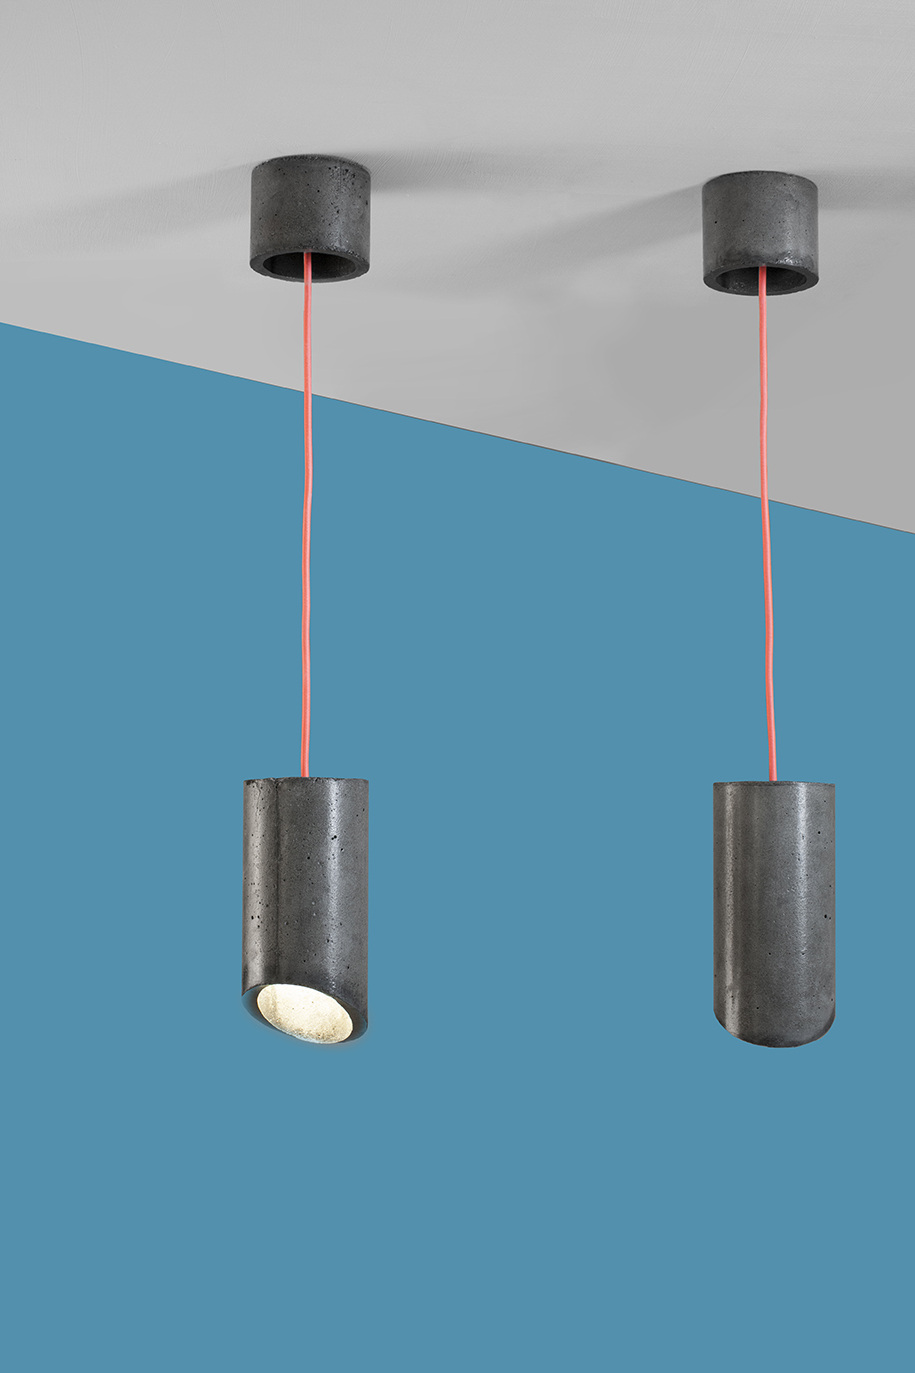 Archisearch So & So Studio colaborate with Kardamov Studio to create pendant lights made of concrete, steel and PLA